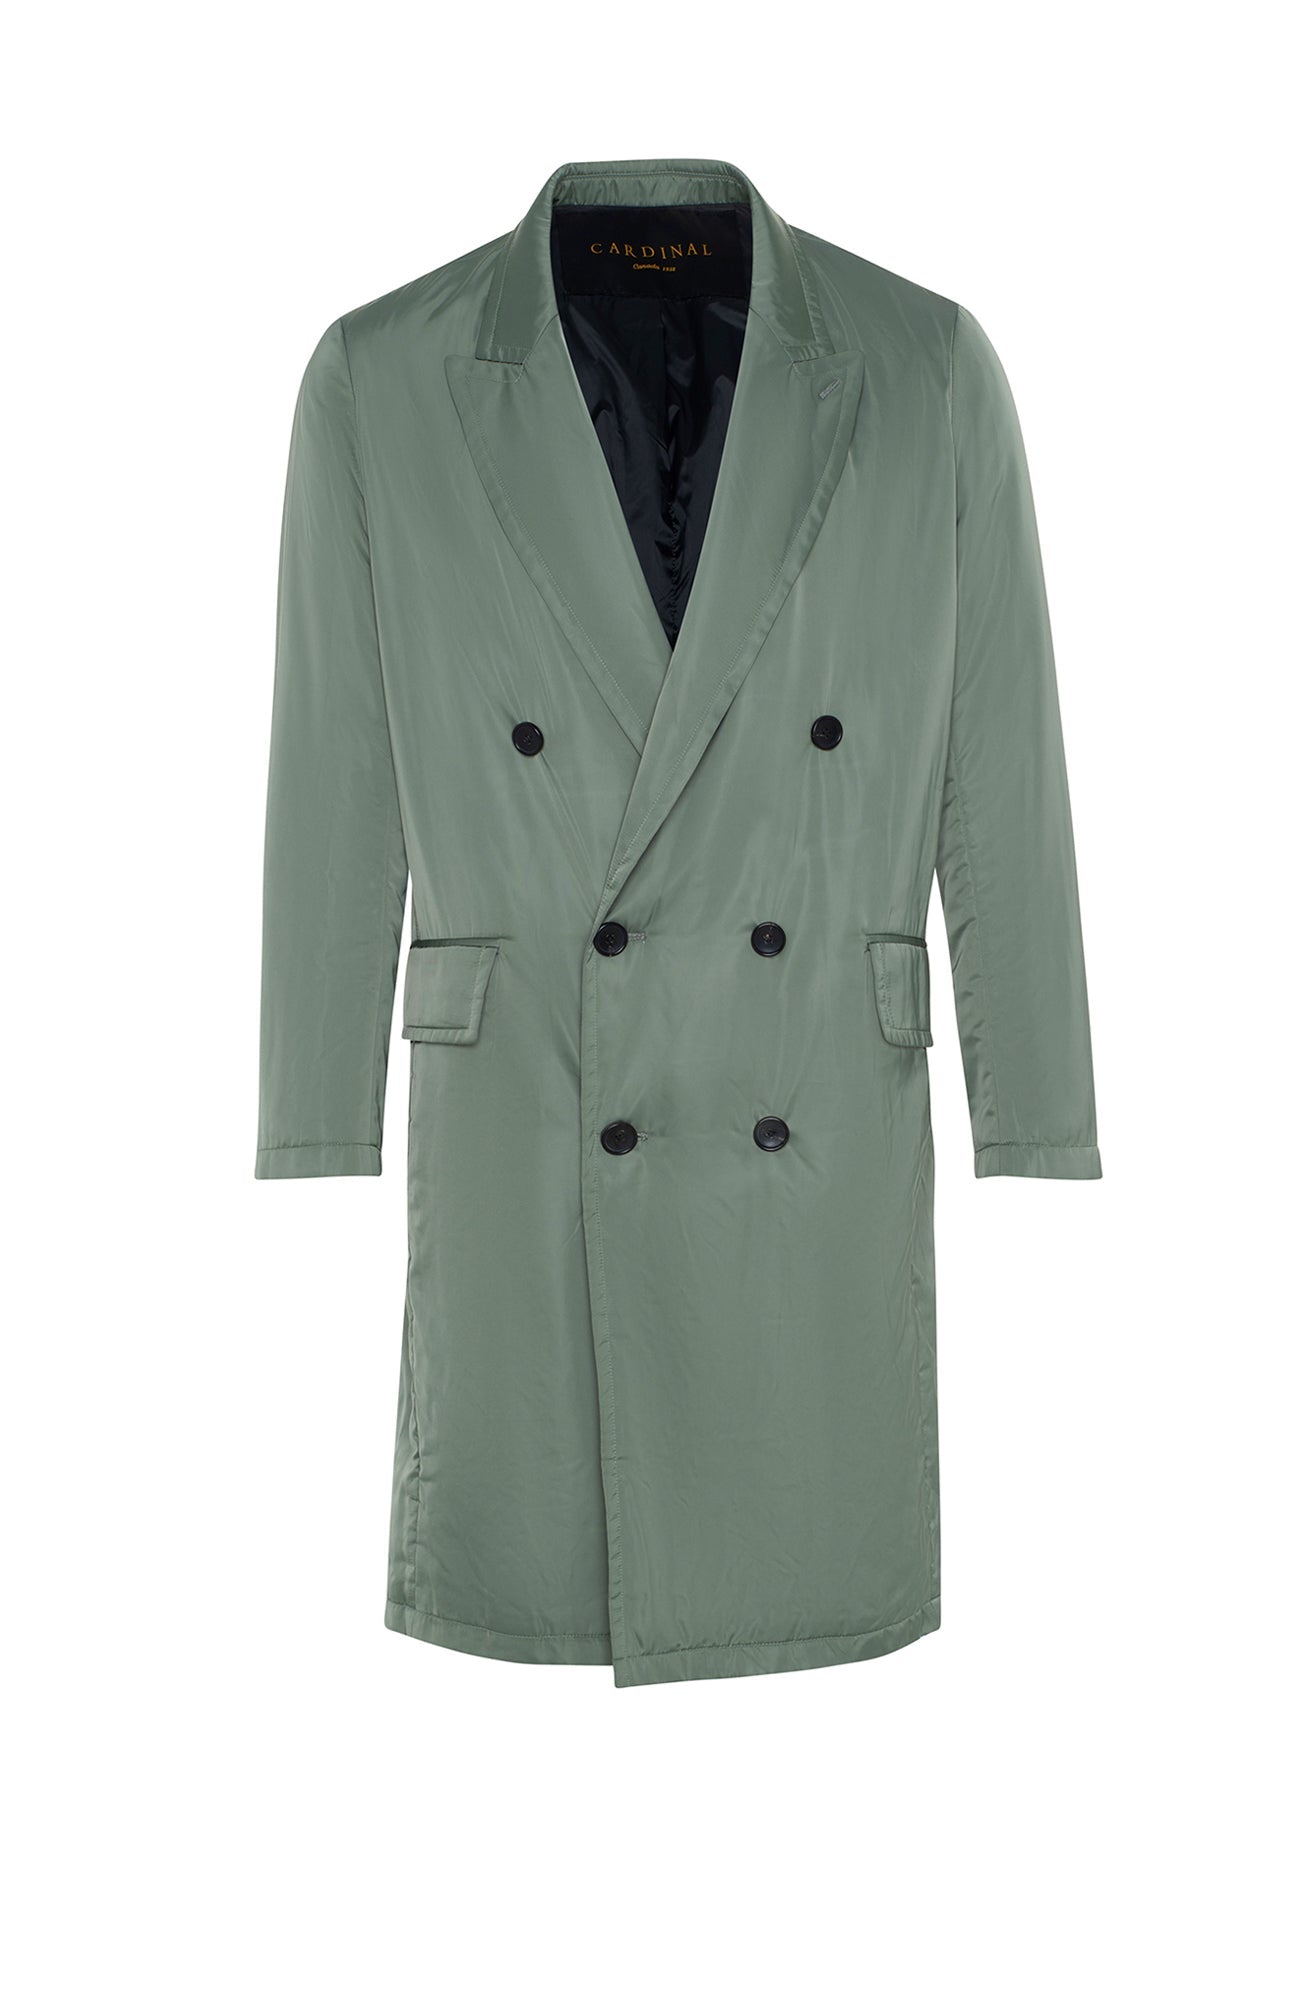 LIMITED EDITION: HUGH DOUBLE BREAST SAGE TOPCOAT - MENS - Cardinal of Canada-CA - HUGH DOUBLE BREAST TOPCOAT 41.5 INCH LENGTH